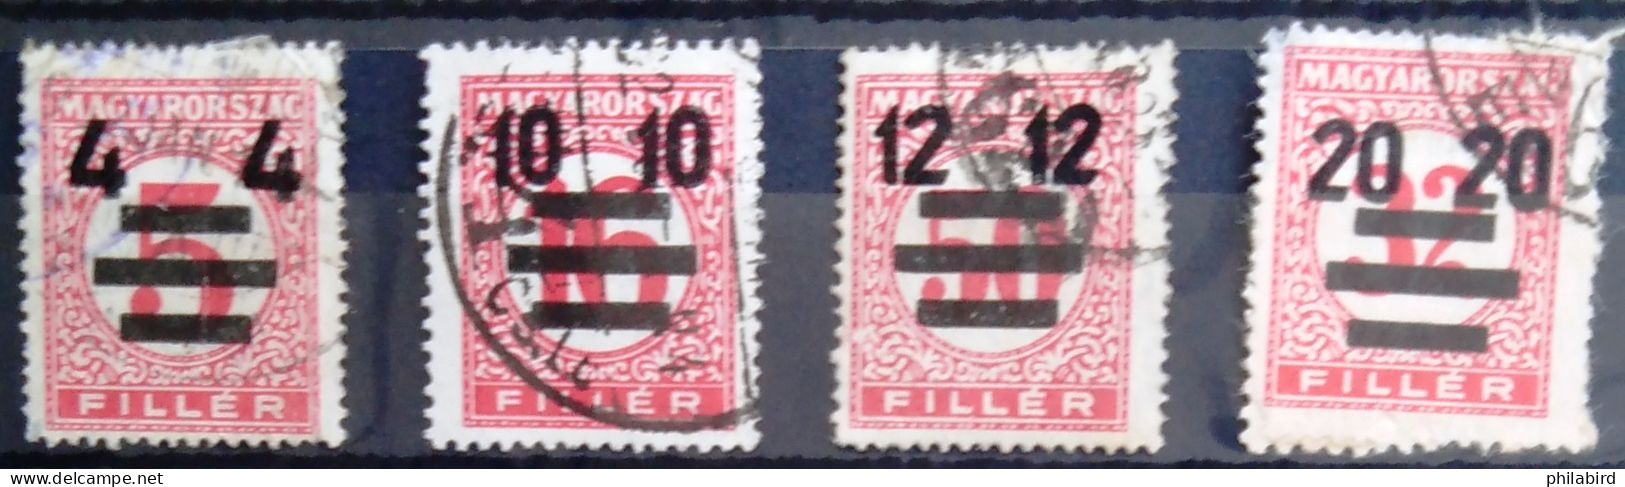 HONGRIE                       TAXE 114 + 115 + 118 + 119                      OBLITERE - Postage Due